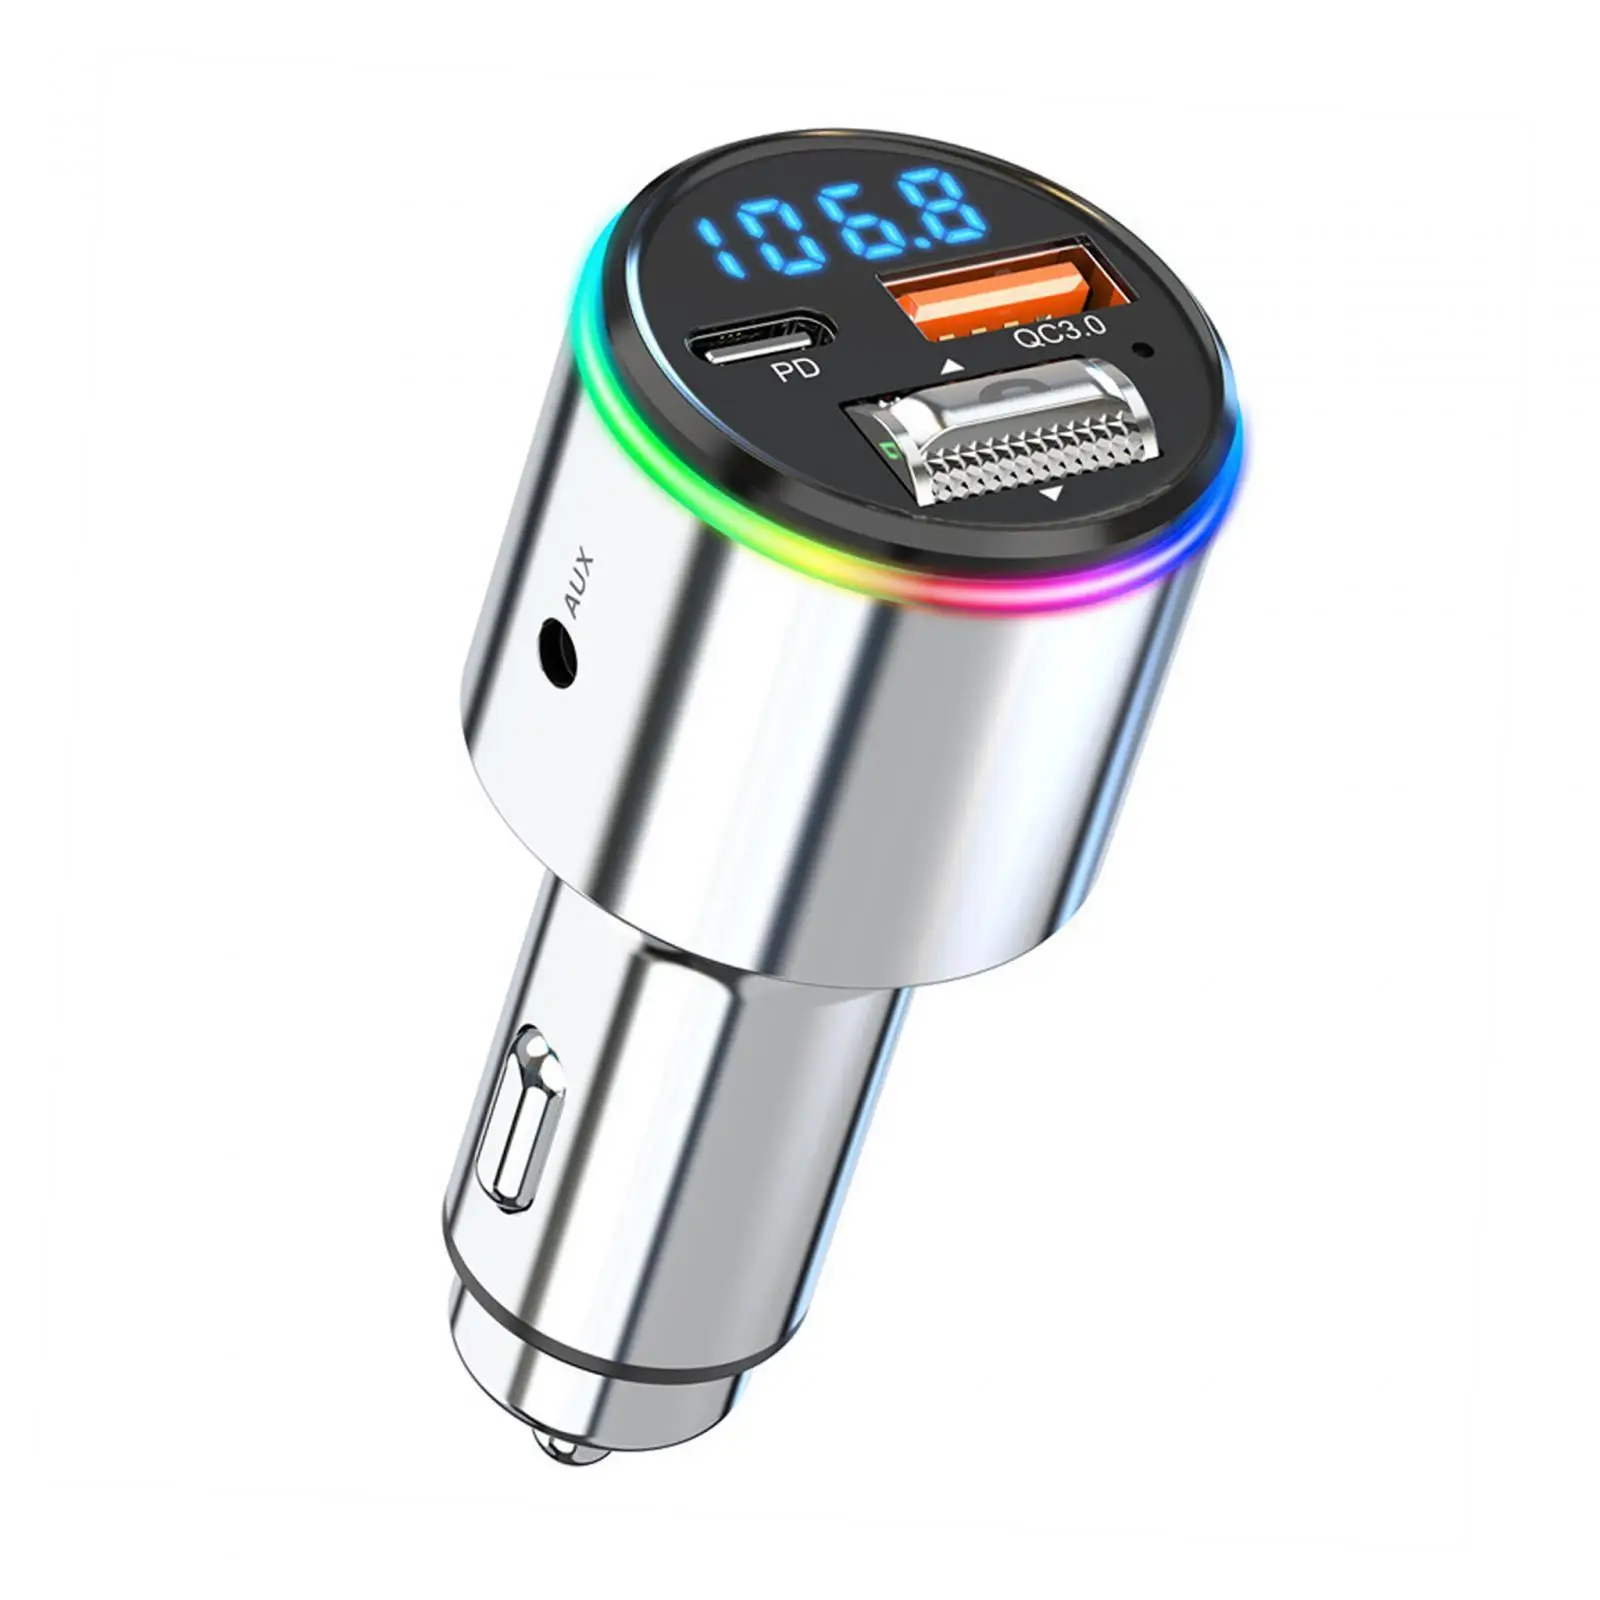 V5.3 FM Transmitter for Car Stable Connection Afc Voice Broadcast Cigarette Lighter BC1.2 Bluetooth Car Adapter for SUV Car